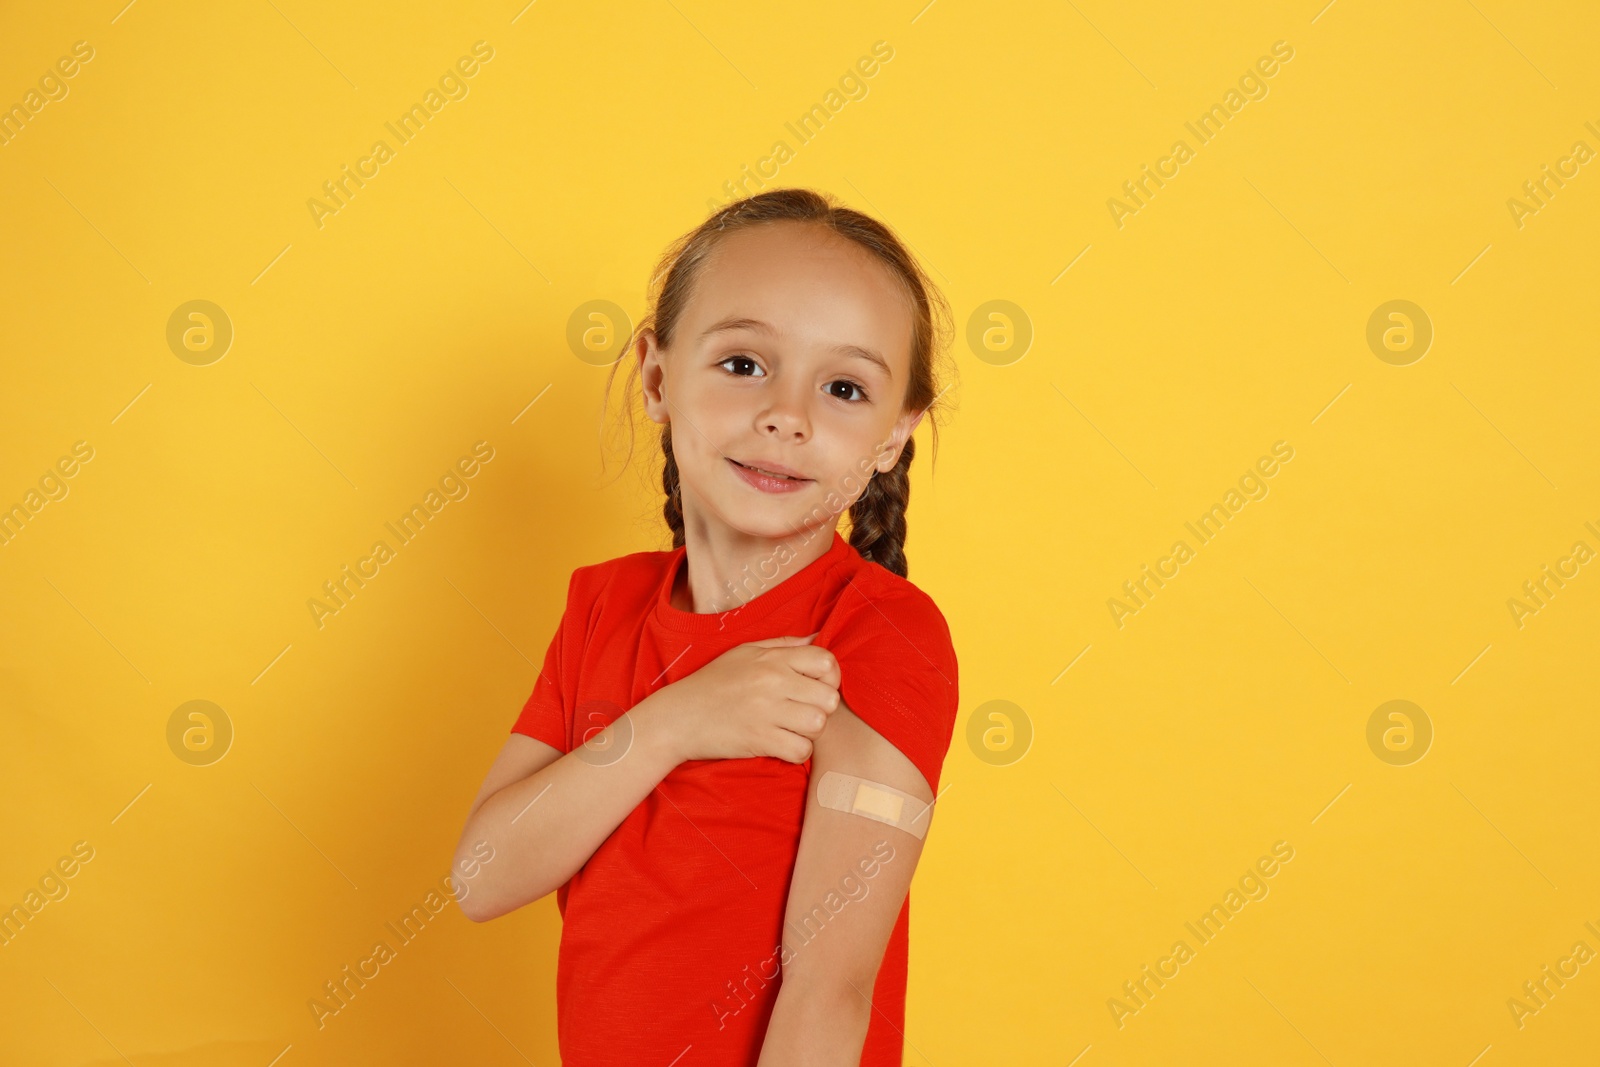 Photo of Vaccinated little girl showing medical plaster on her arm against yellow background